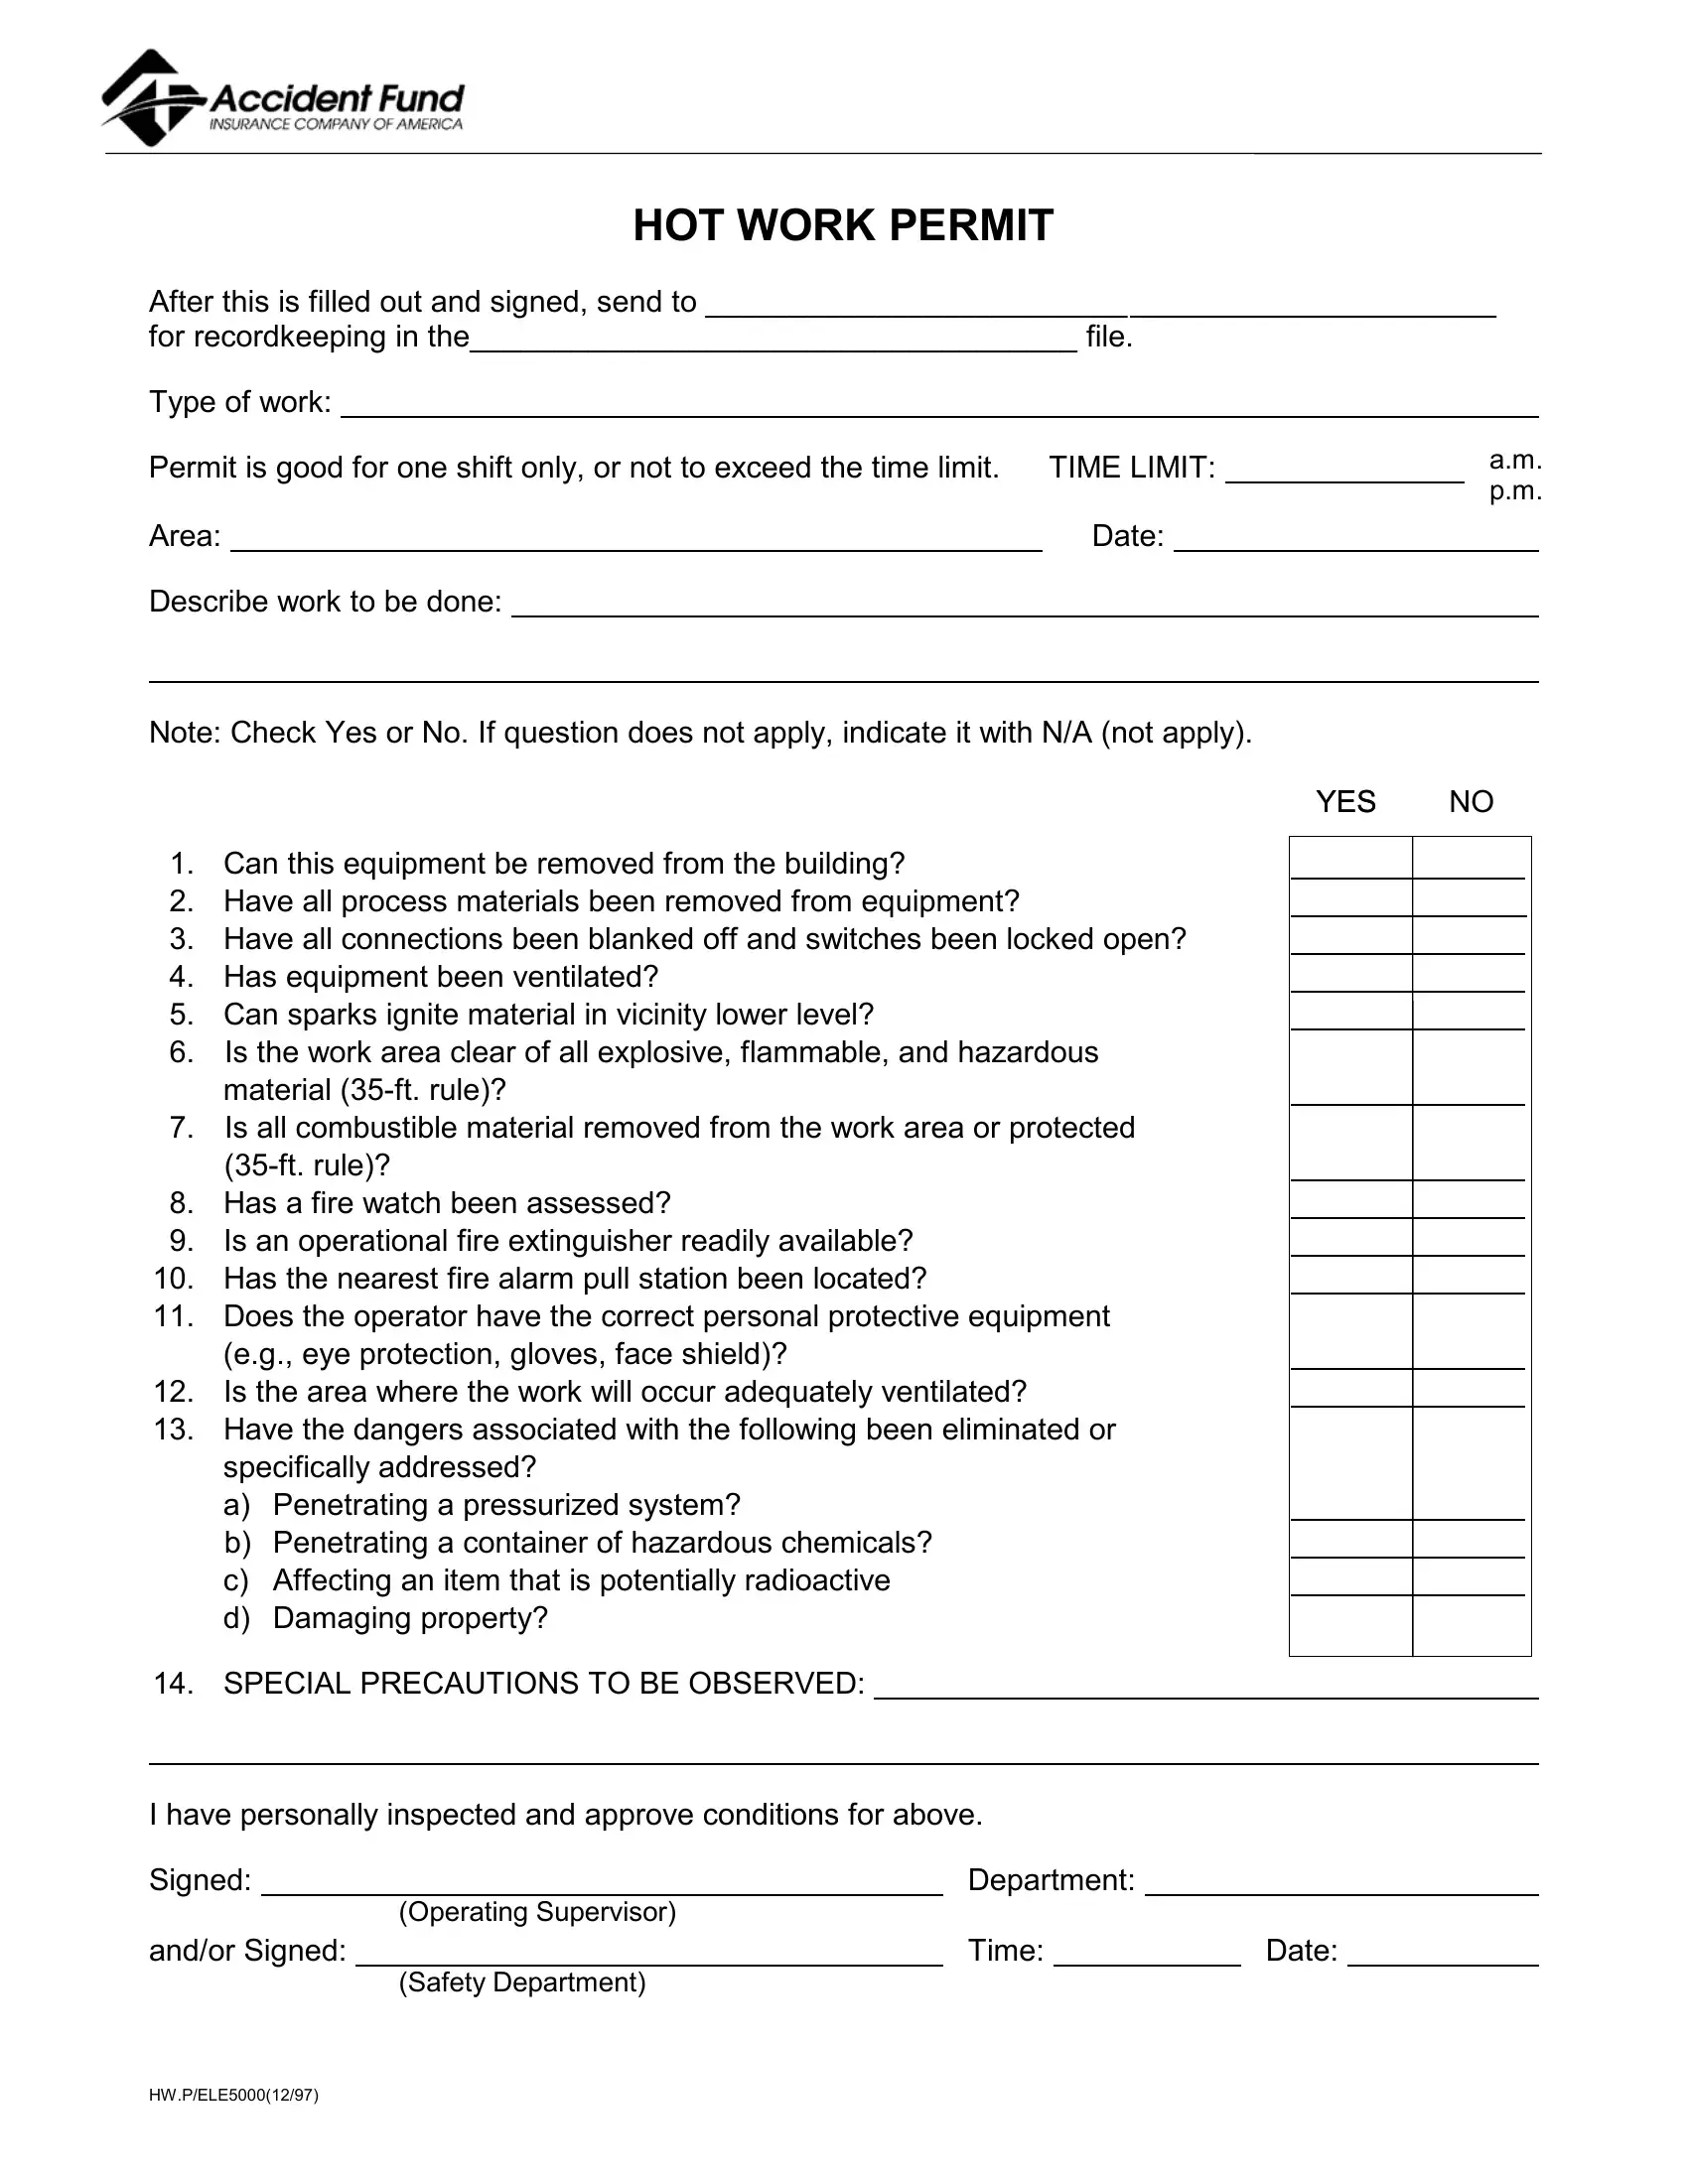 Hot Work Permit Template Fill Online, Printable, Fillable, Blank